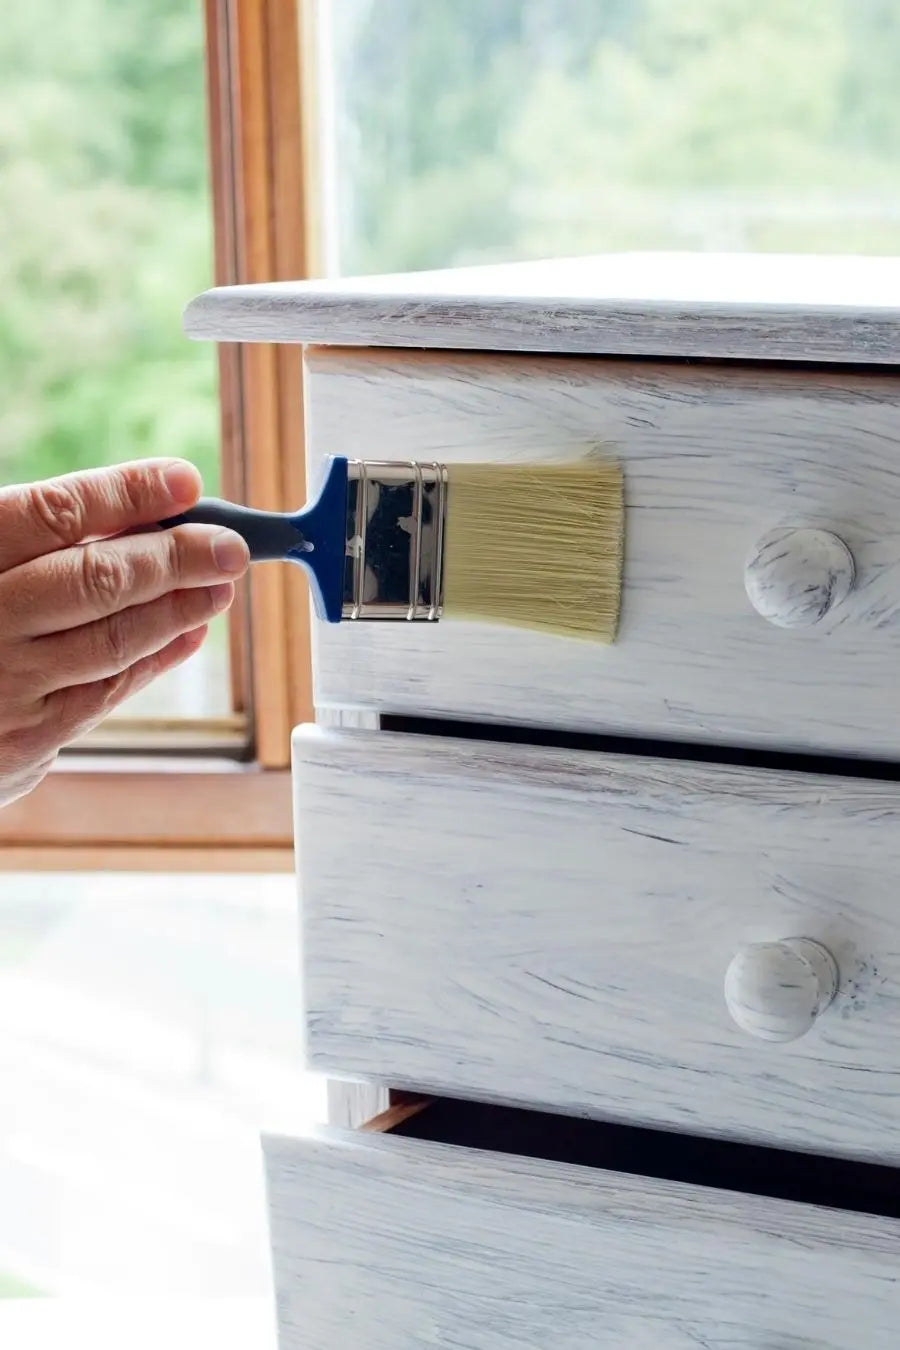 How to Paint Furniture White (The Fastest Way!)